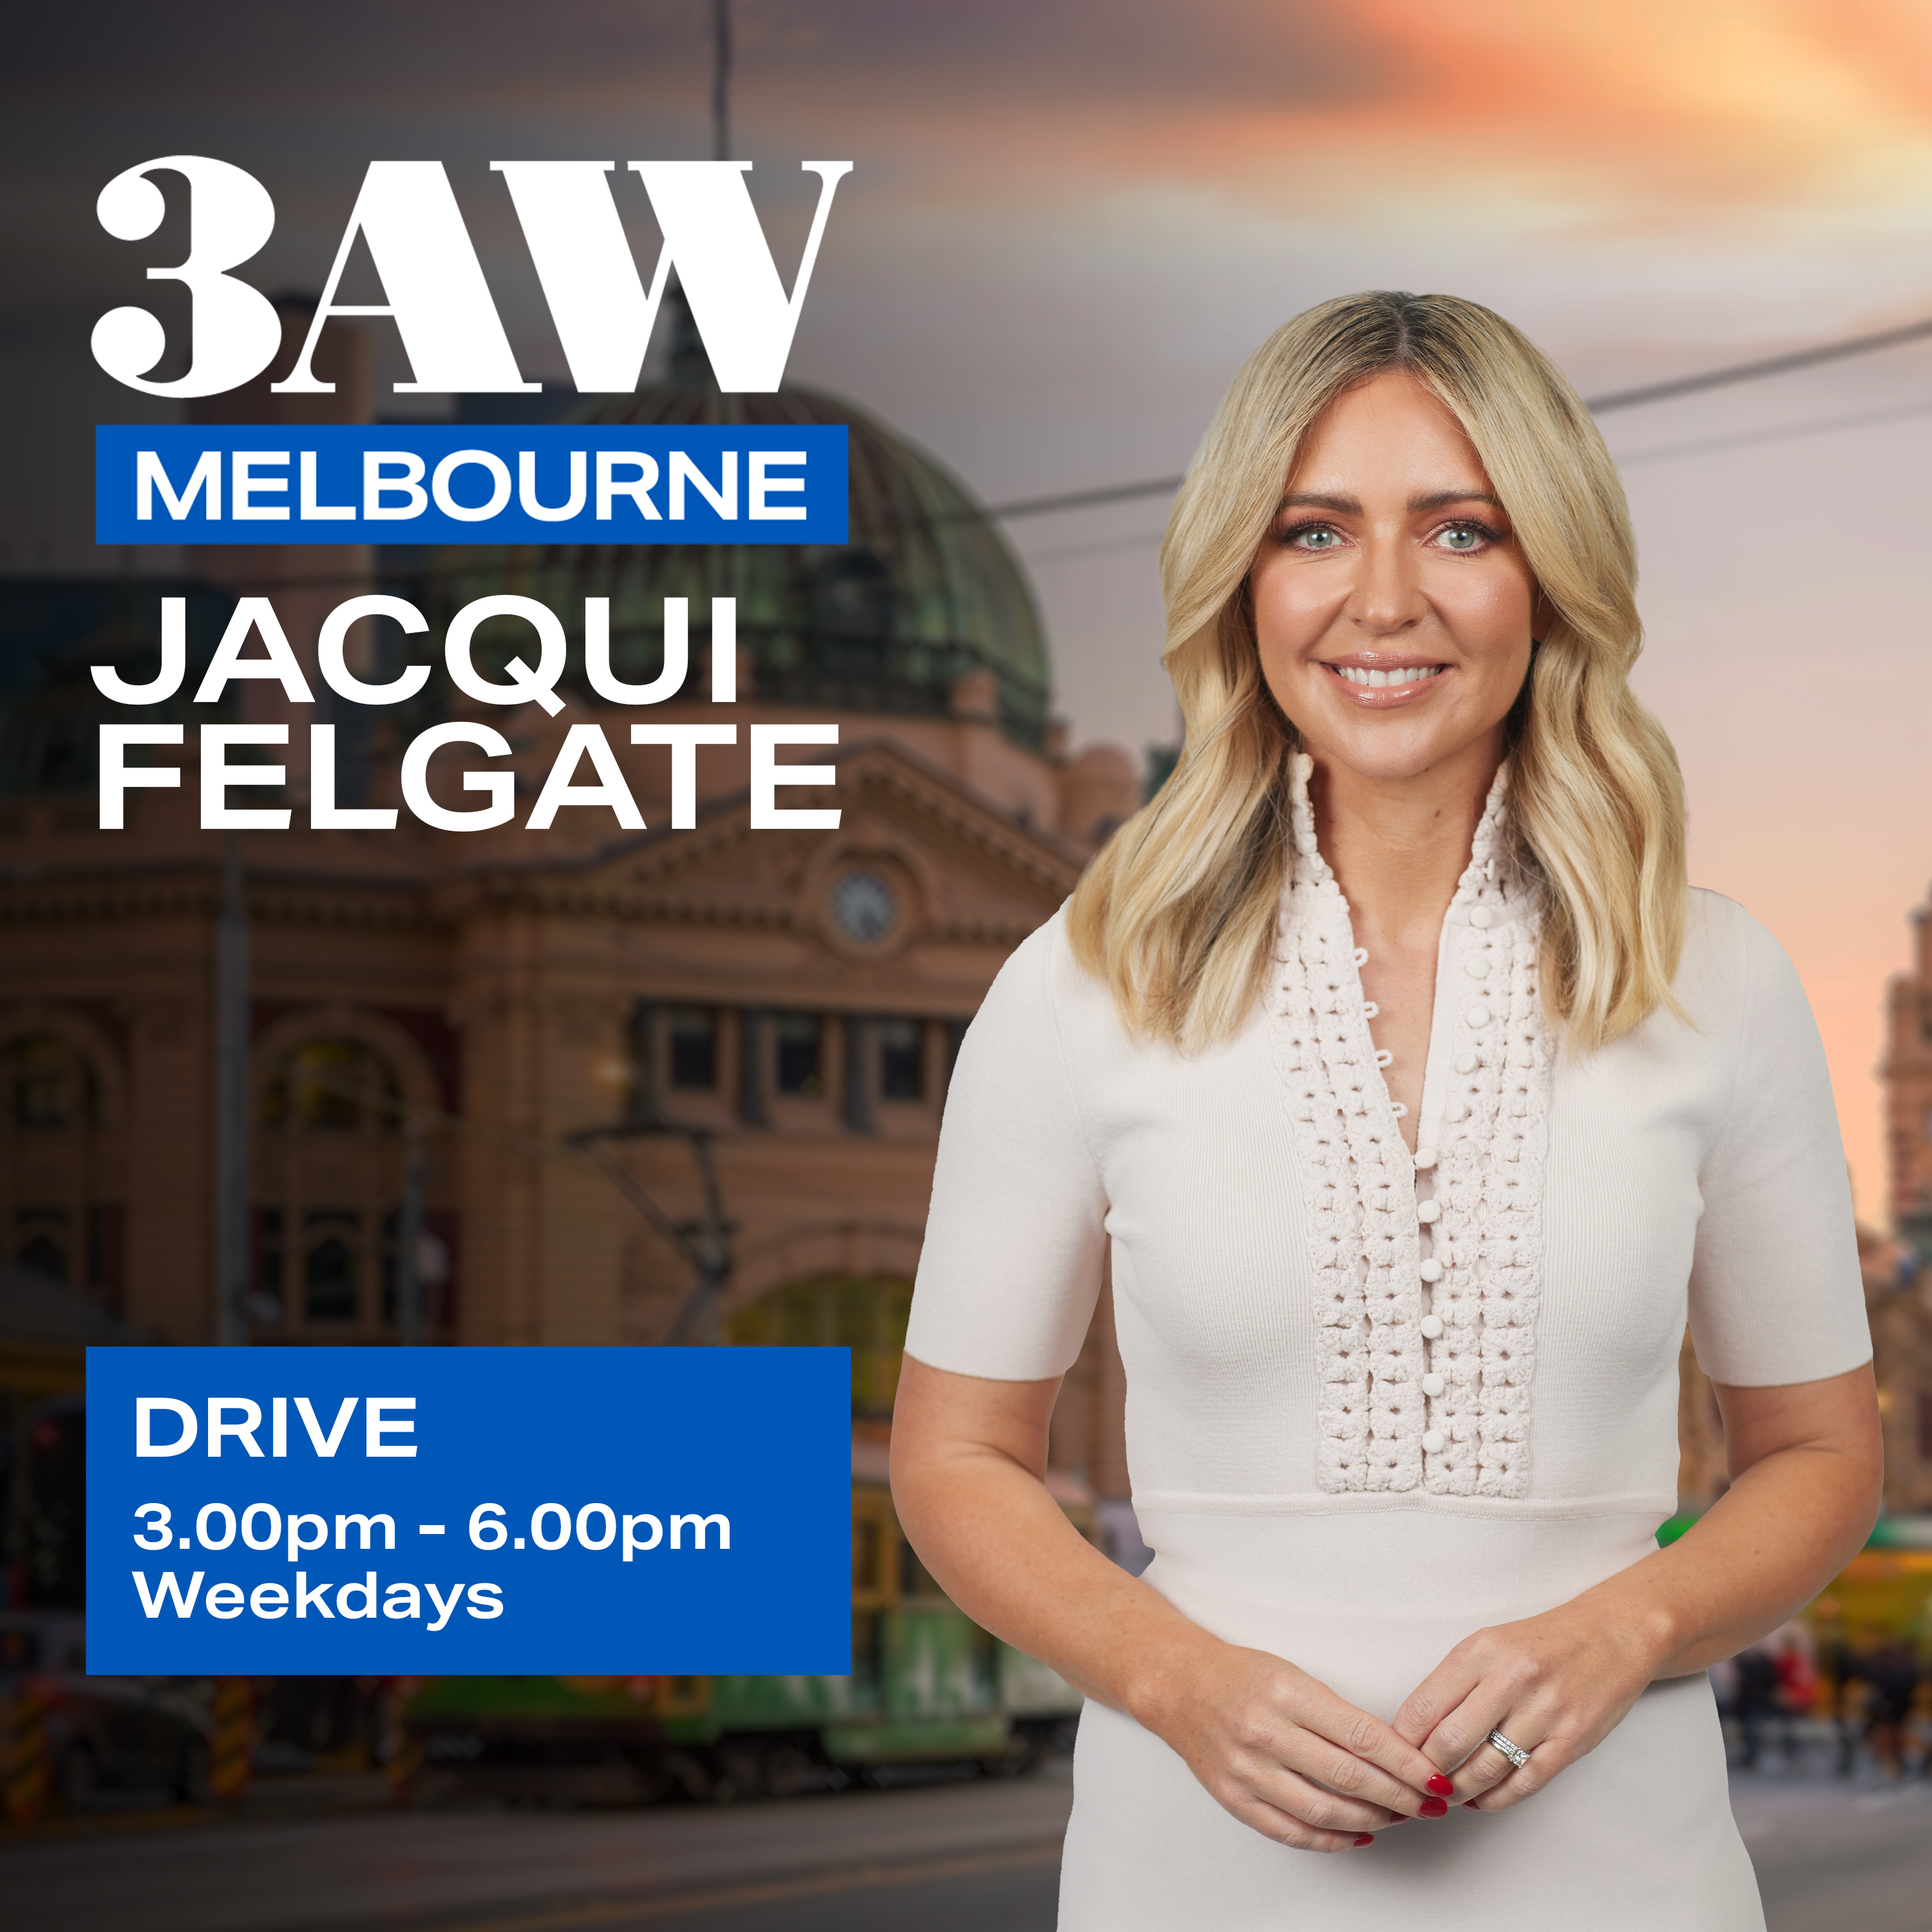 Drive with Jacqui Felgate